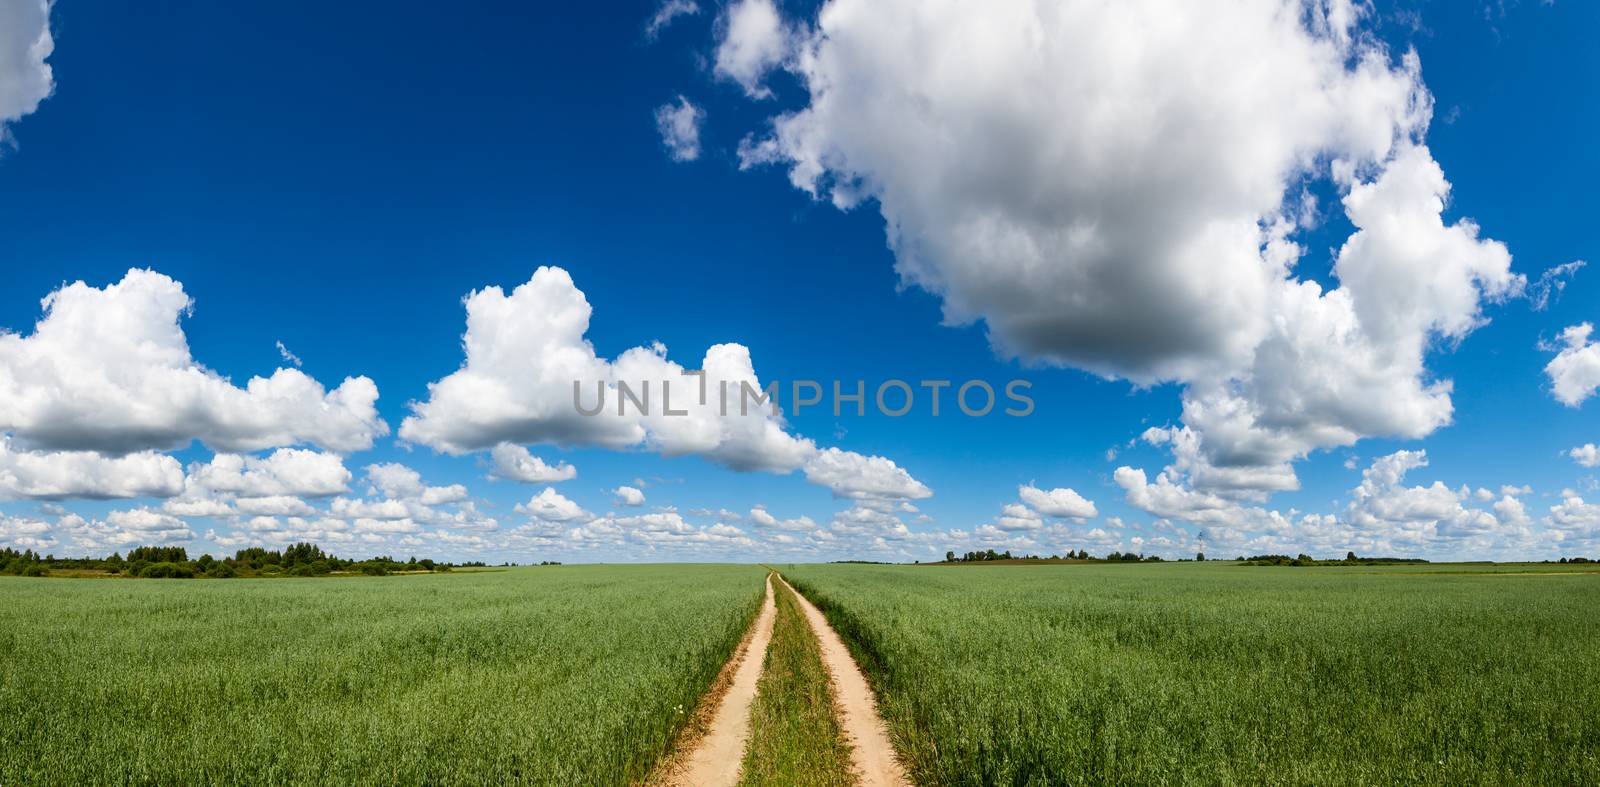 Panoramic view of summer field with green oats, dirt road and blue cloudy sky